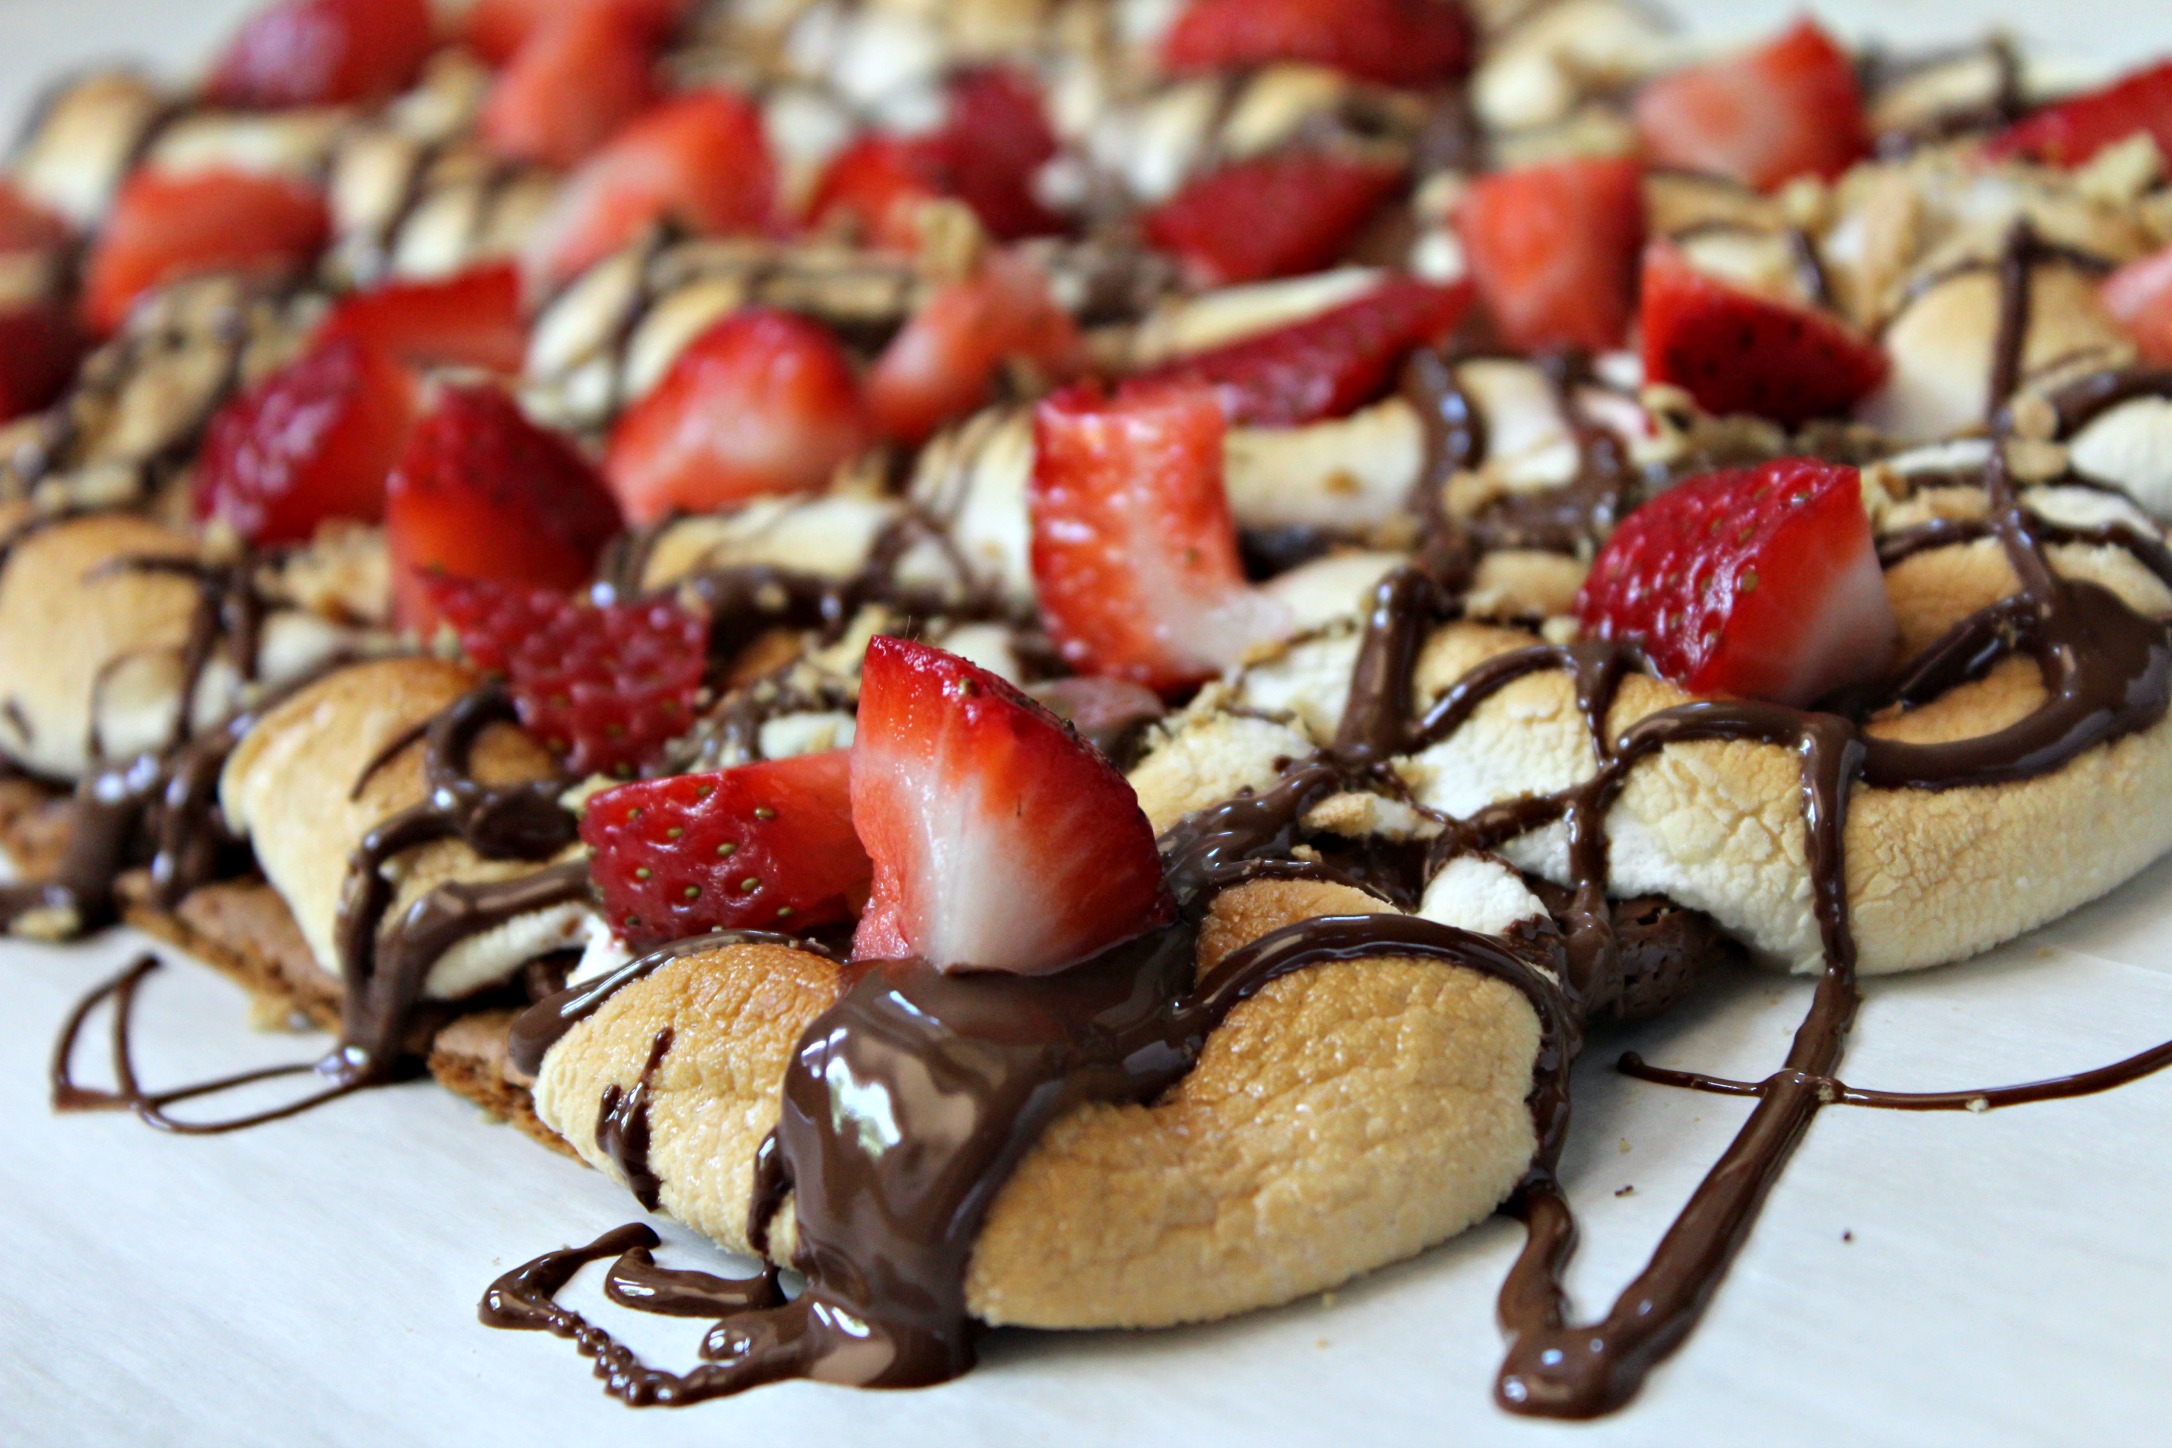 Oven Baked Strawberry Smores